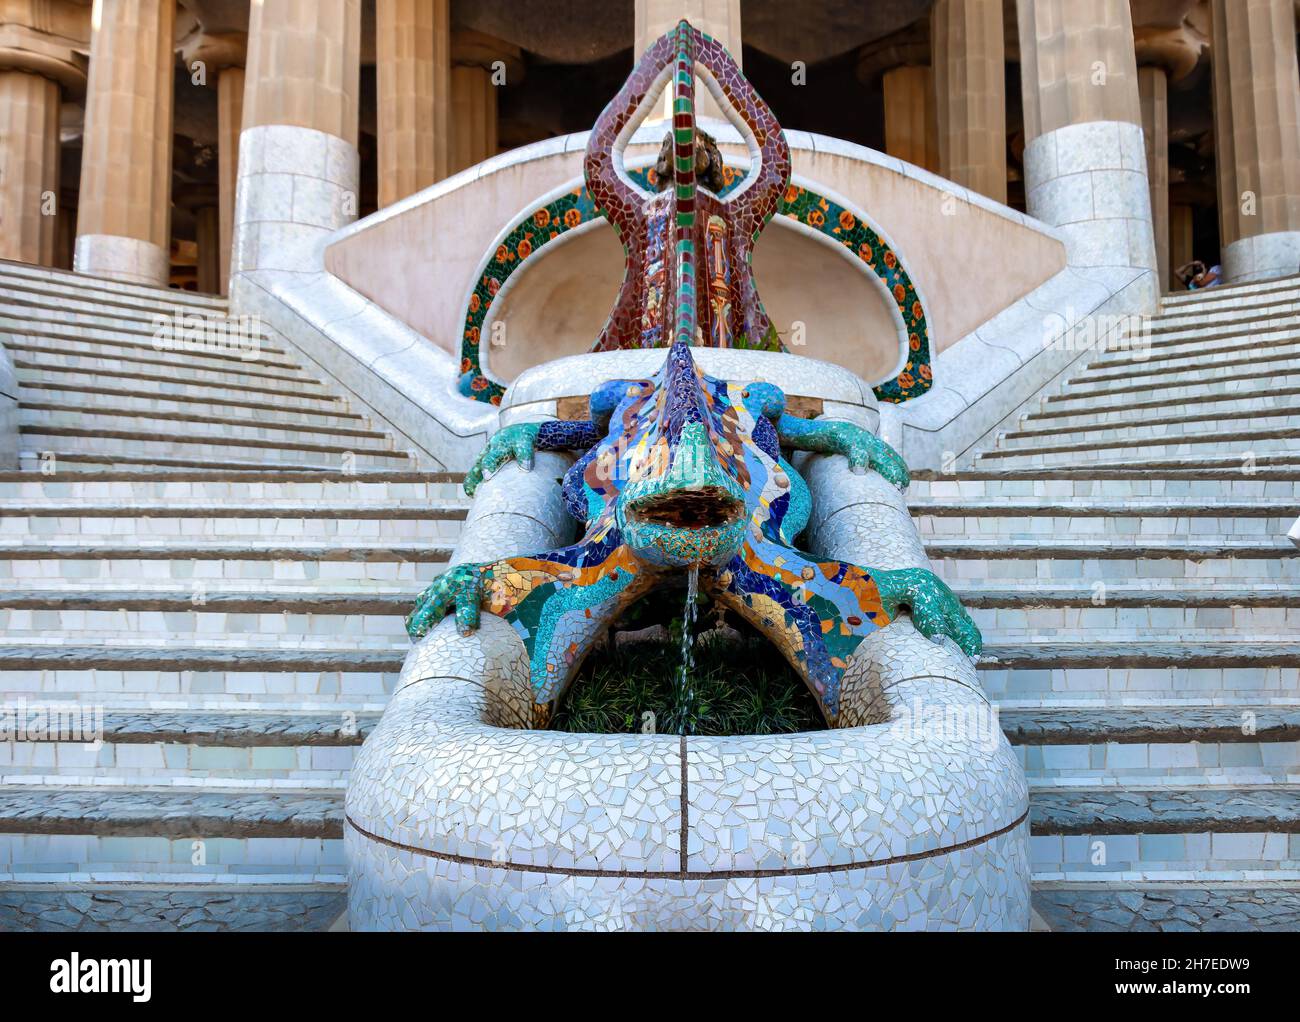 Famous mosaic lizard or salamander fountain in Park Guell. Mosaic sculpture in the Parc Güell designed by Antoni Gaudí located on Carmel Hill, Barcelo Stock Photo